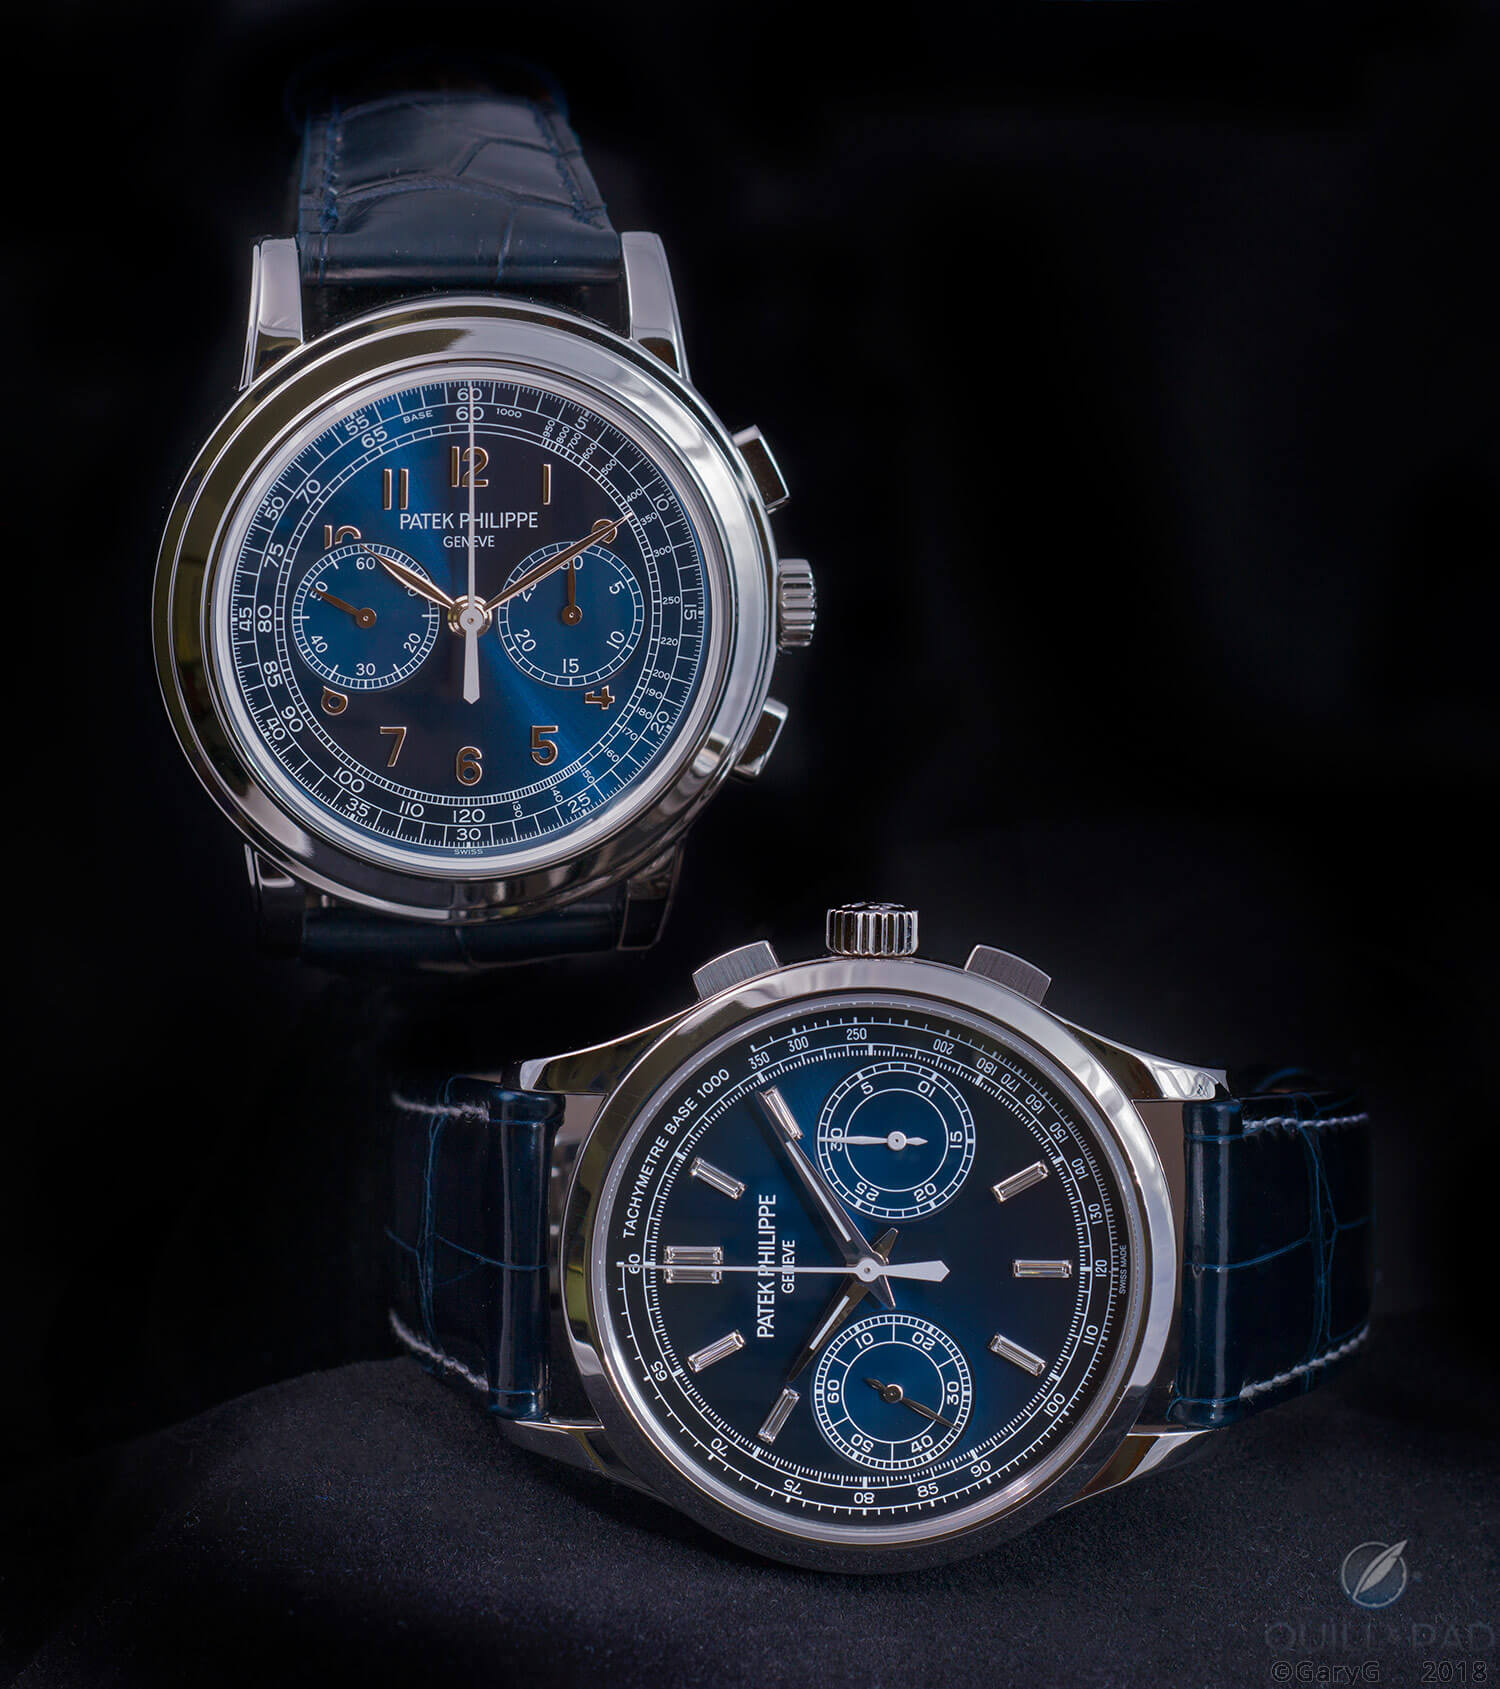 Parting shot: Patek Philippe Reference 5070P-013 “London” (left) and Reference 5170P